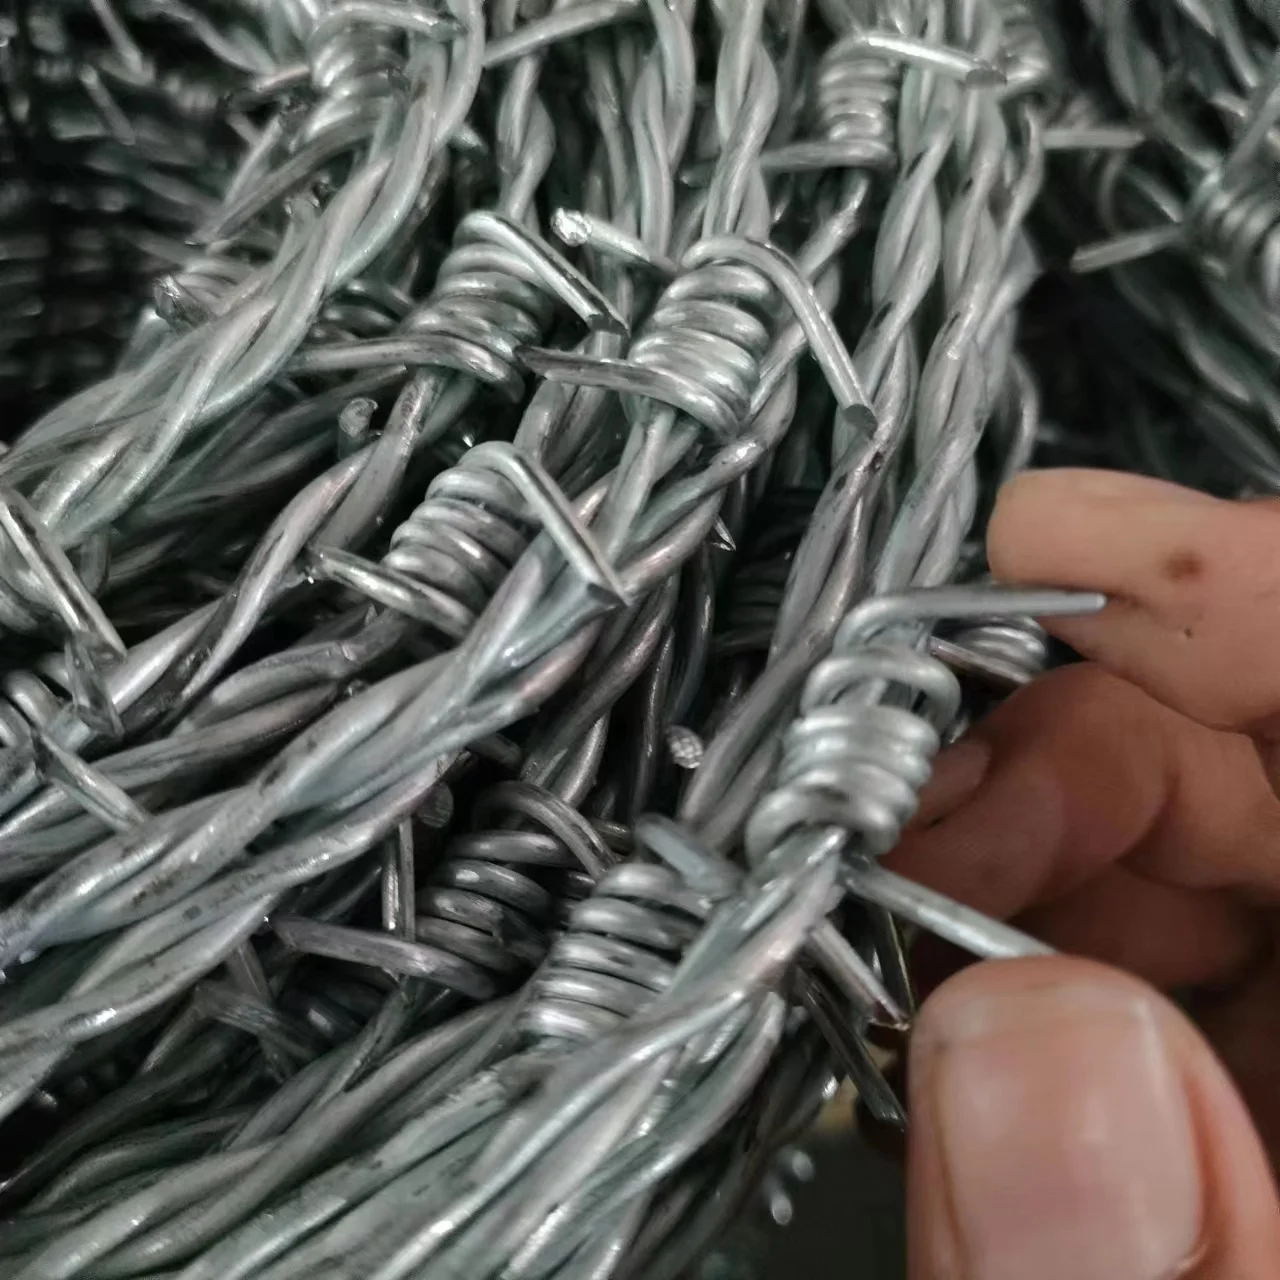 5-20kg/roll Galvanized Steel Barbed Razor Wire BTO-22 For Protection